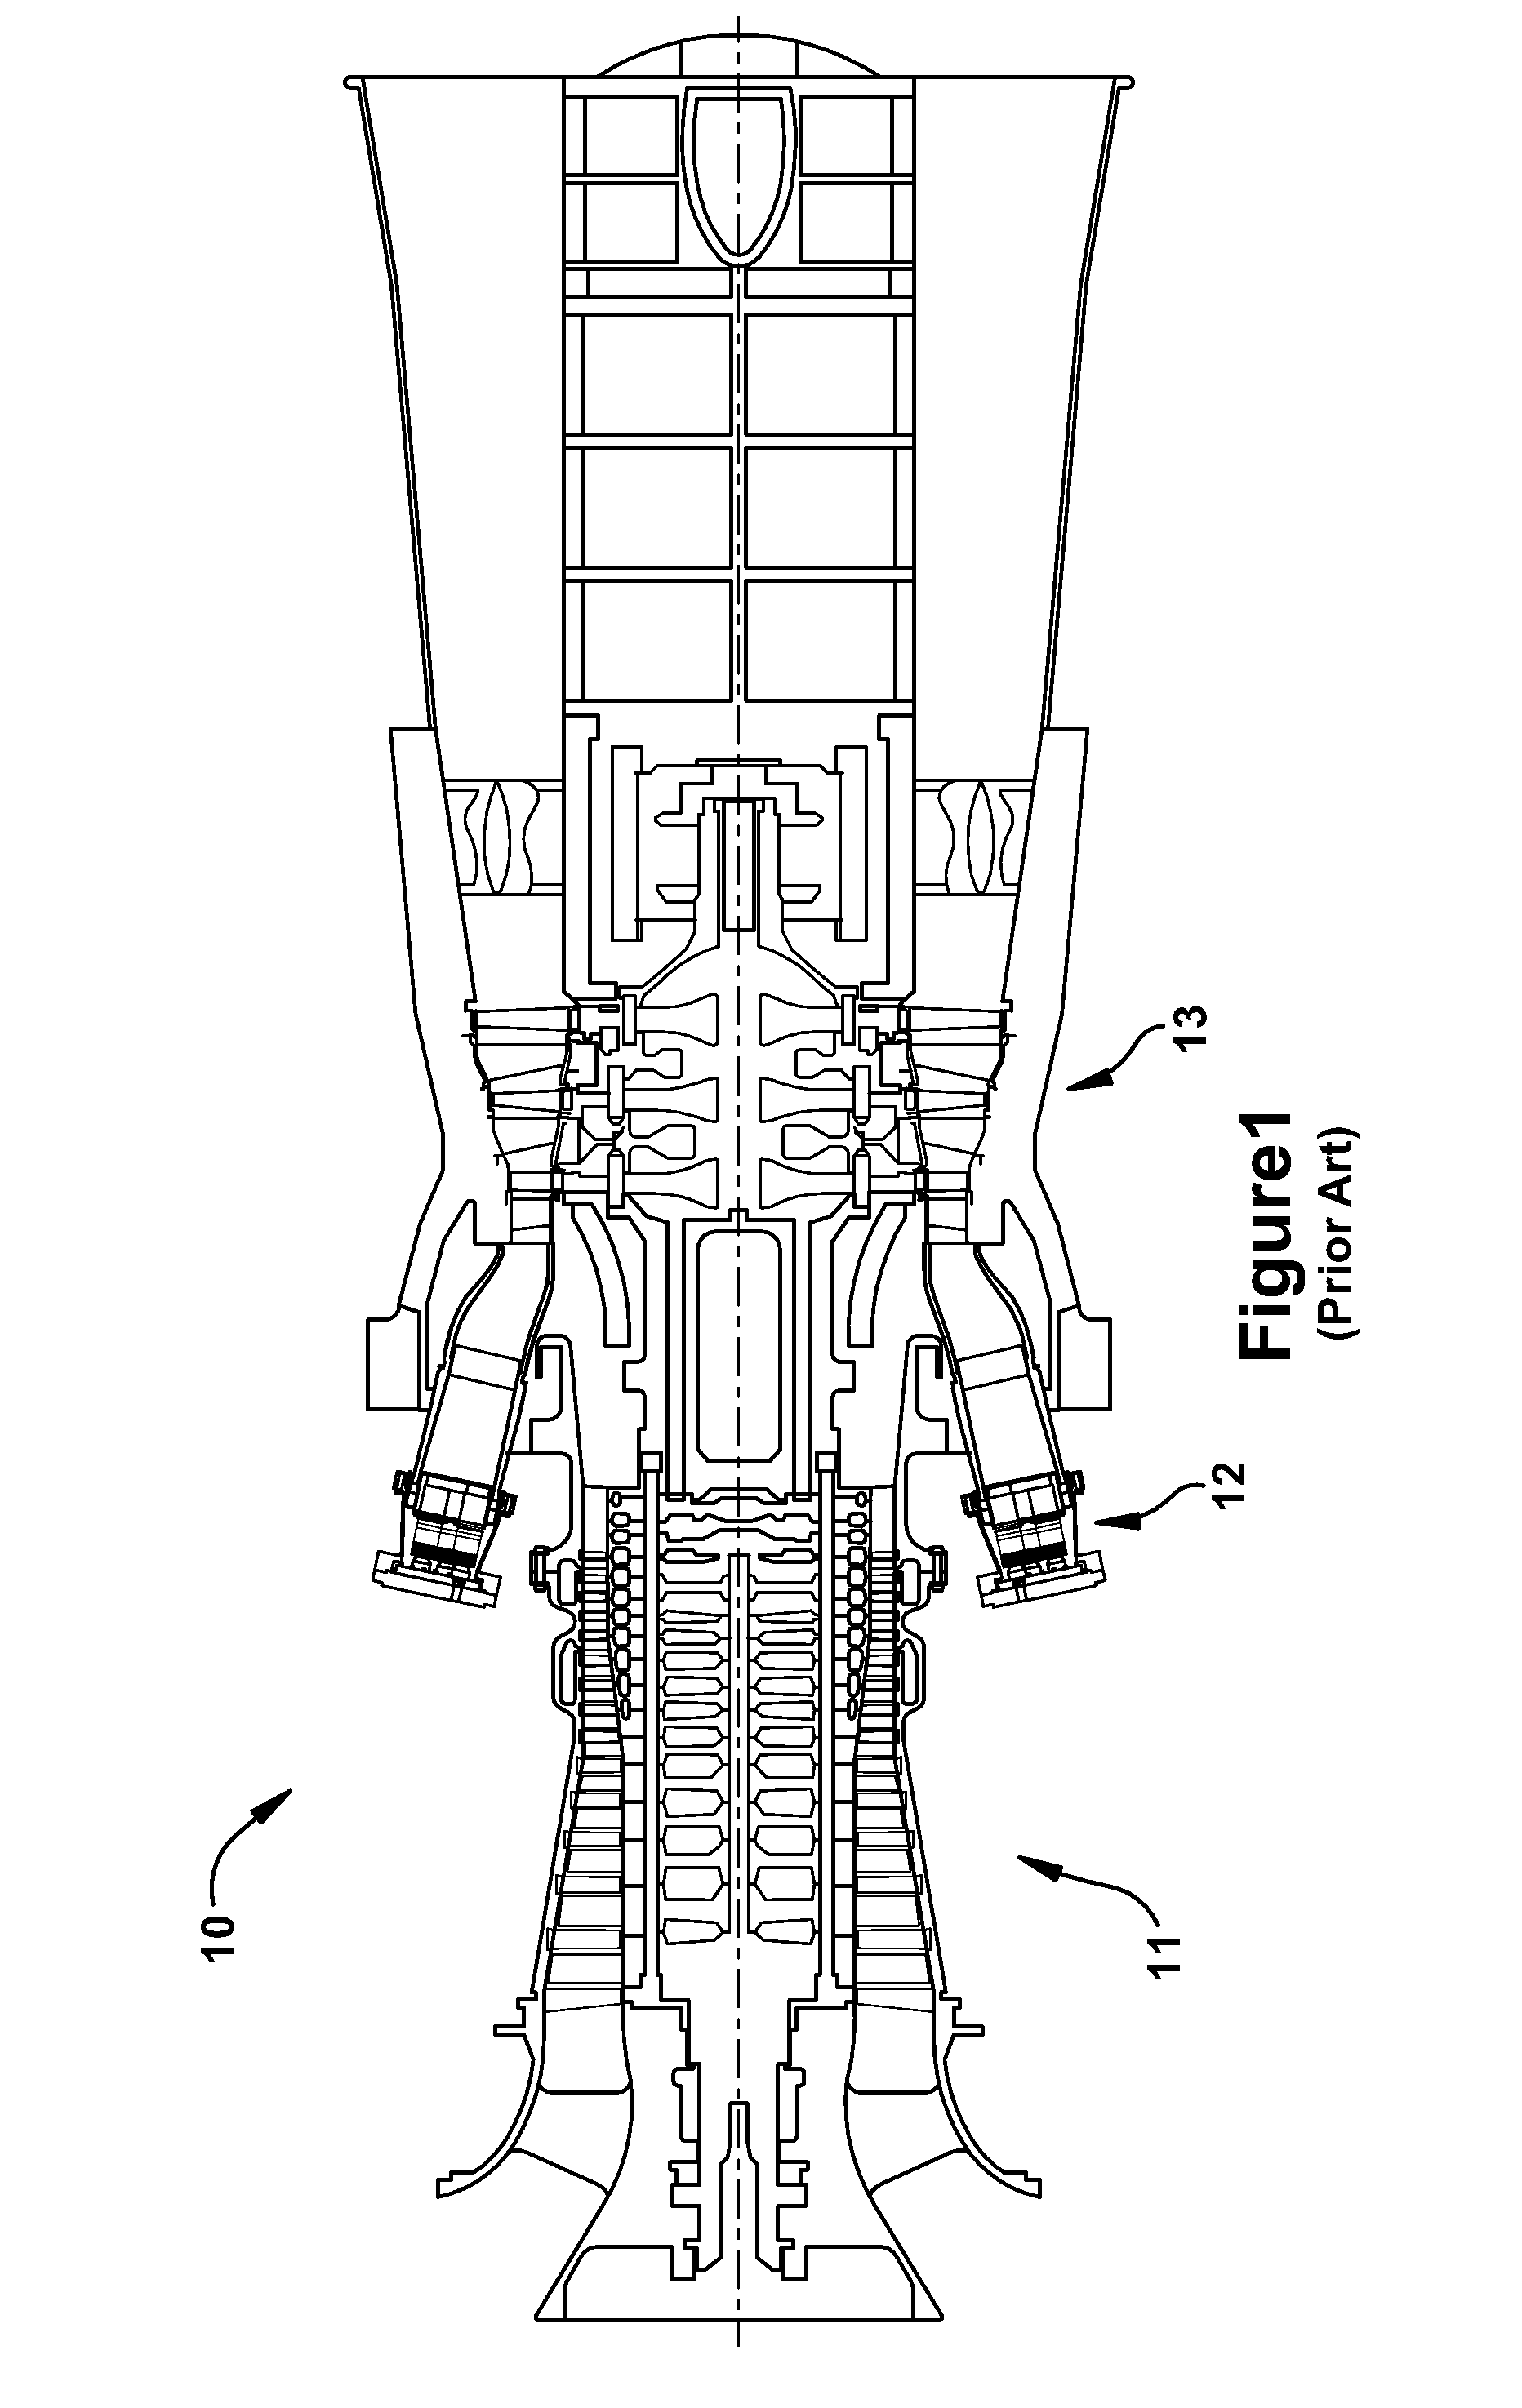 Systems and apparatus relating to downstream fuel and air injection in gas turbines